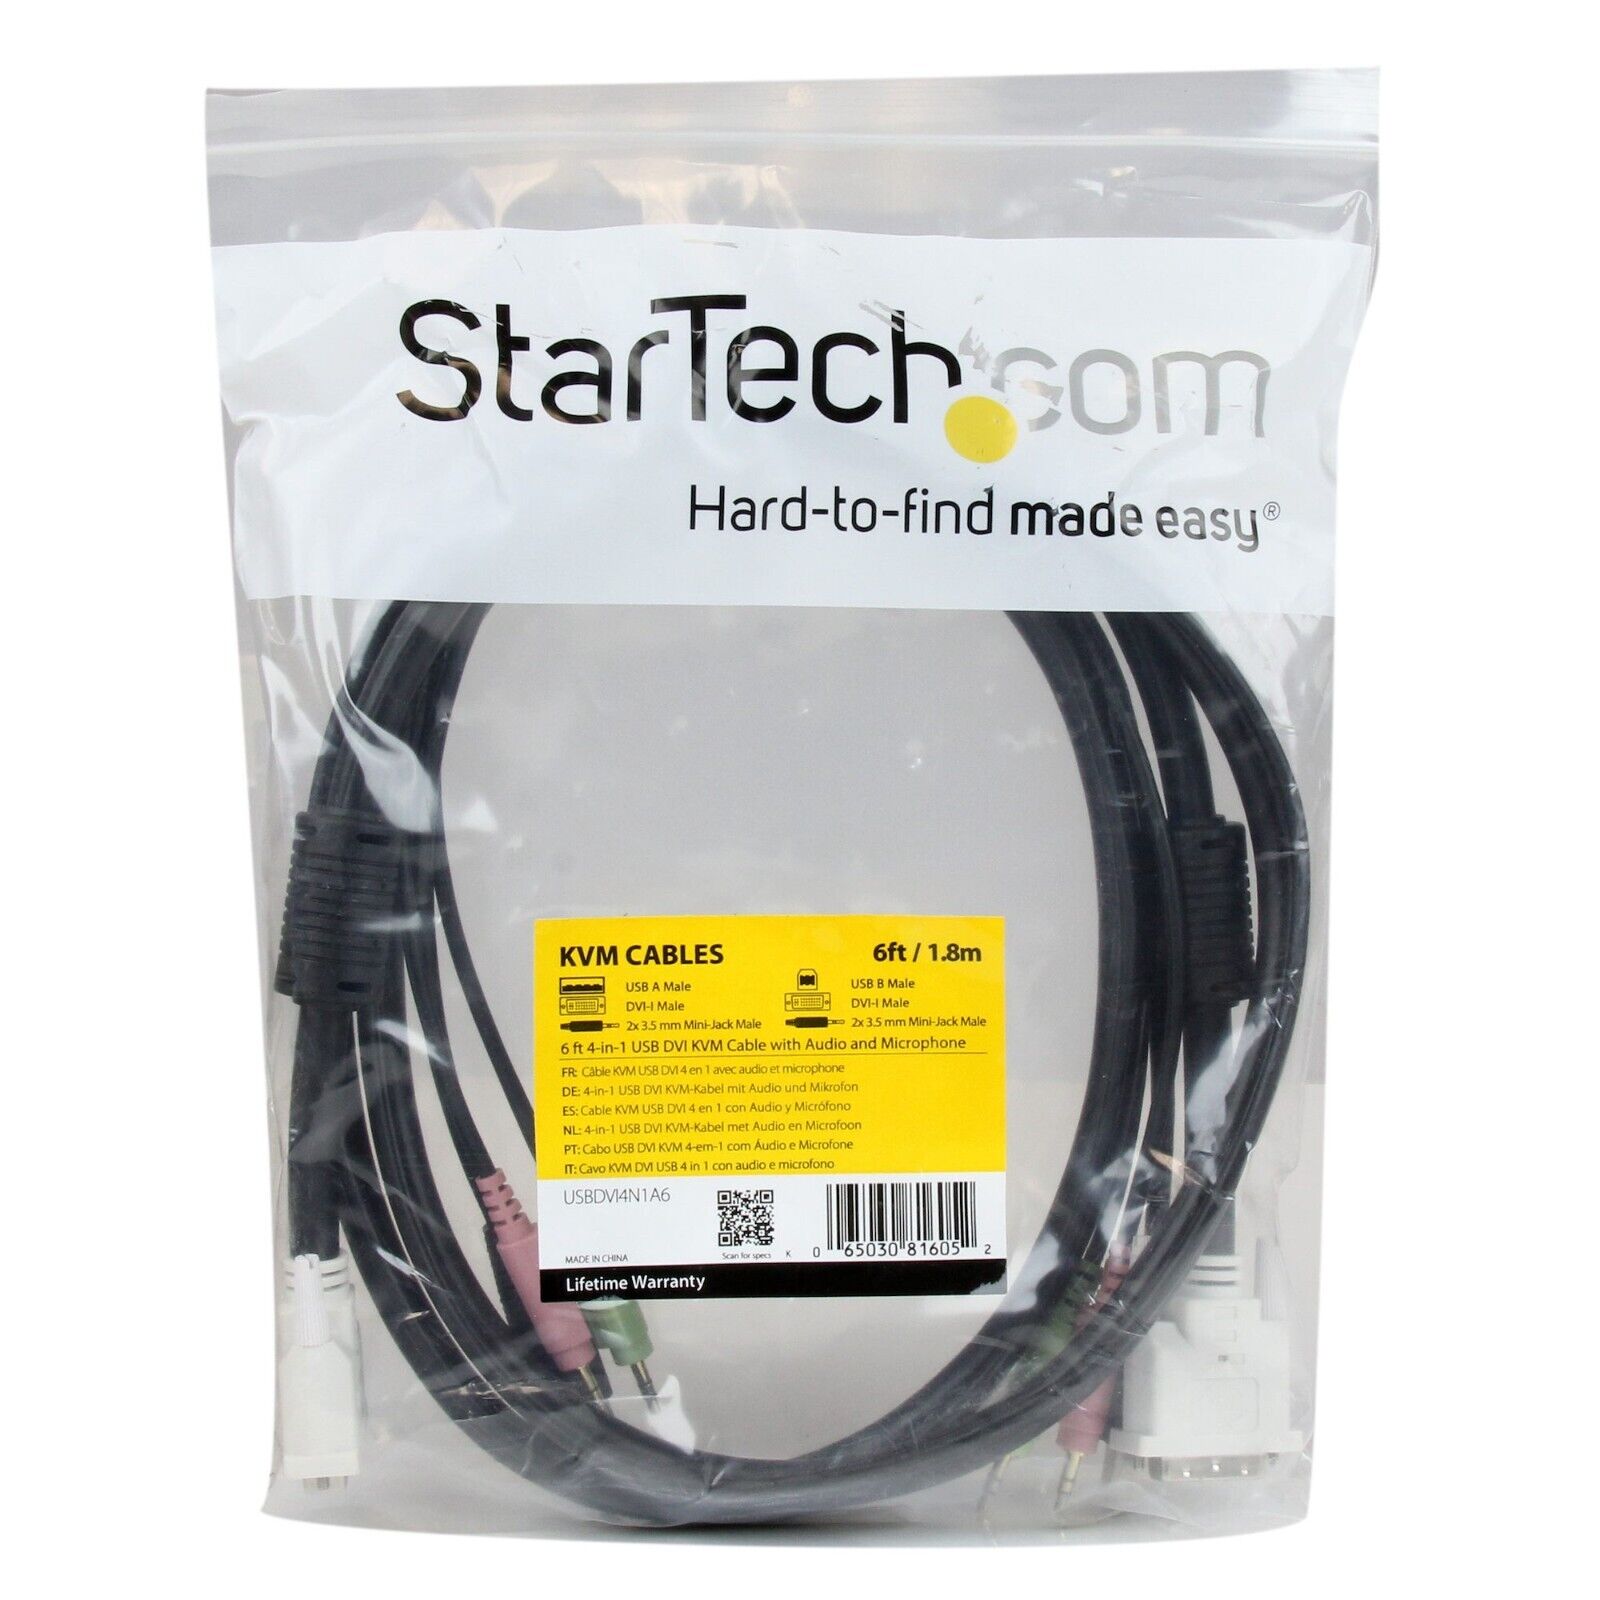 Startech 6 ft 4-in-1 USB DVI KVM Cable with Audio and Microphone